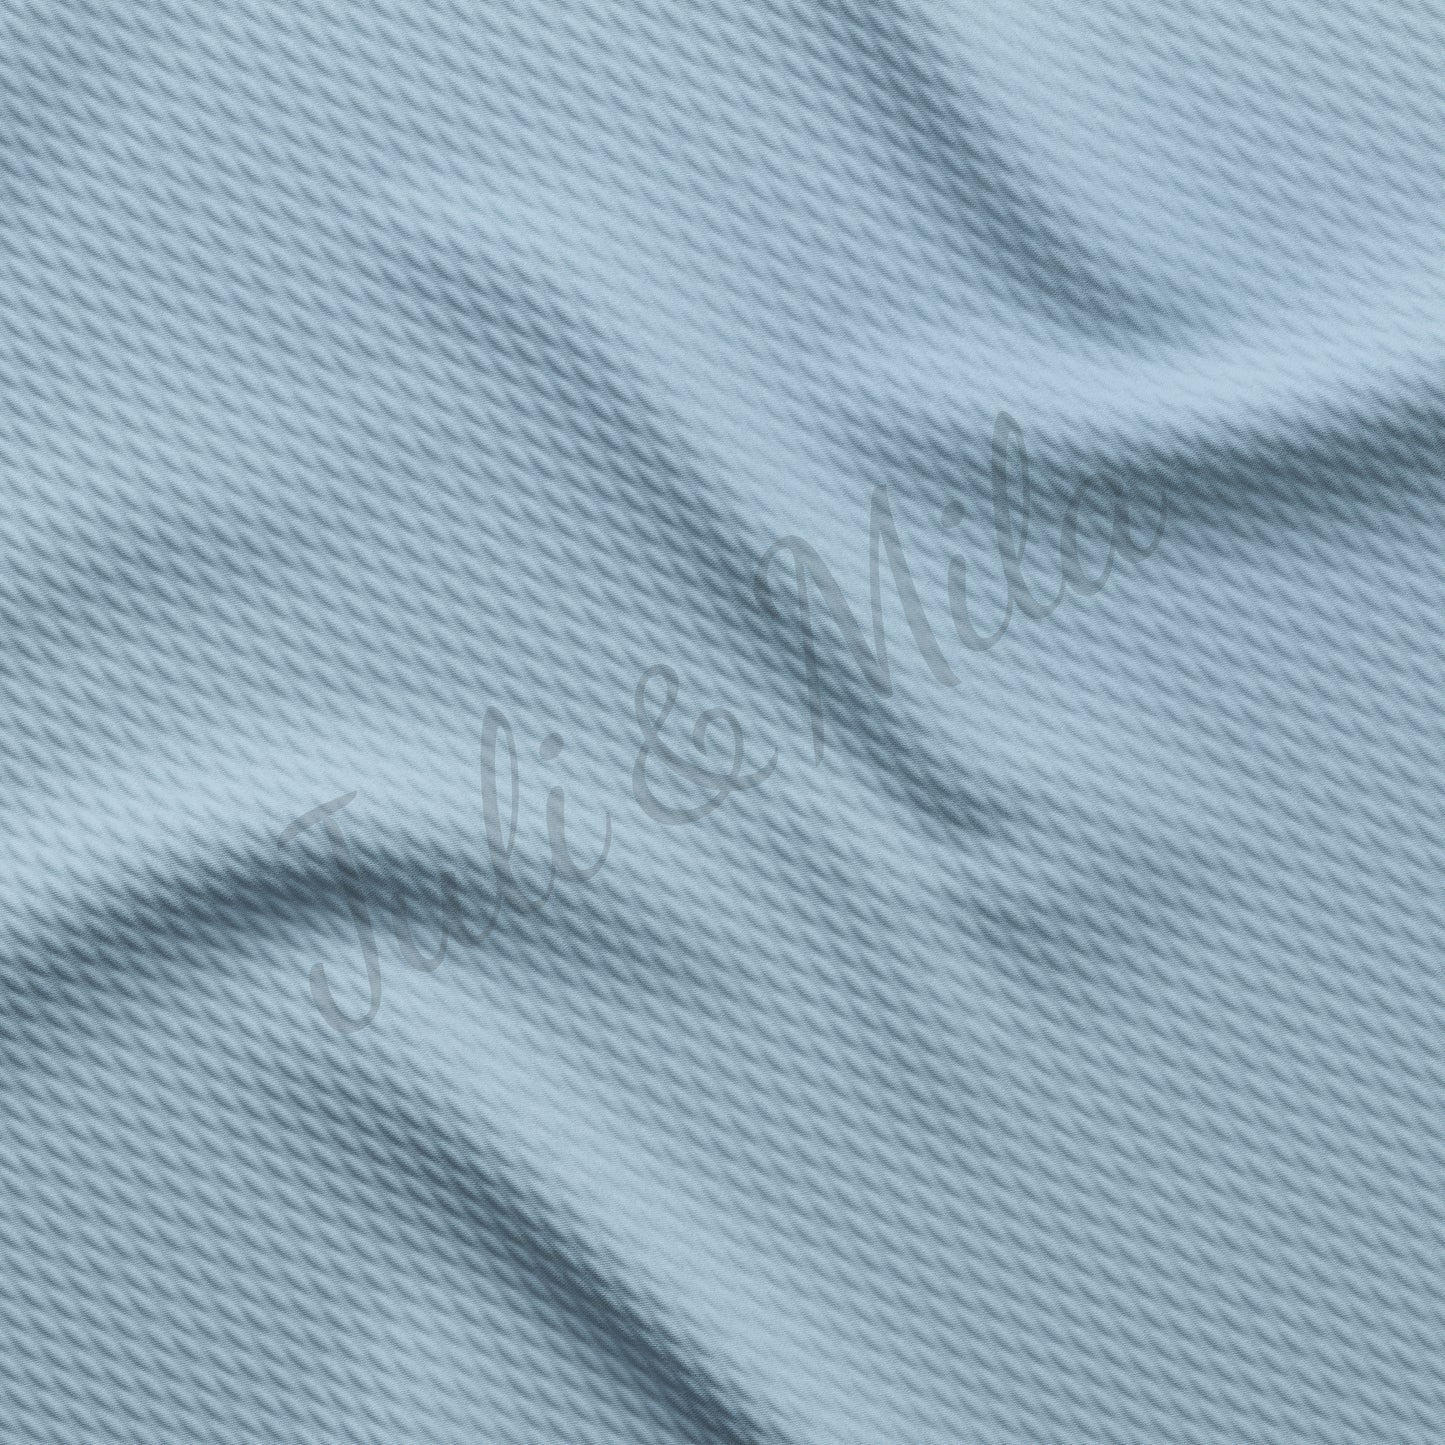 Nile Blue Liverpool Bullet Textured Fabric